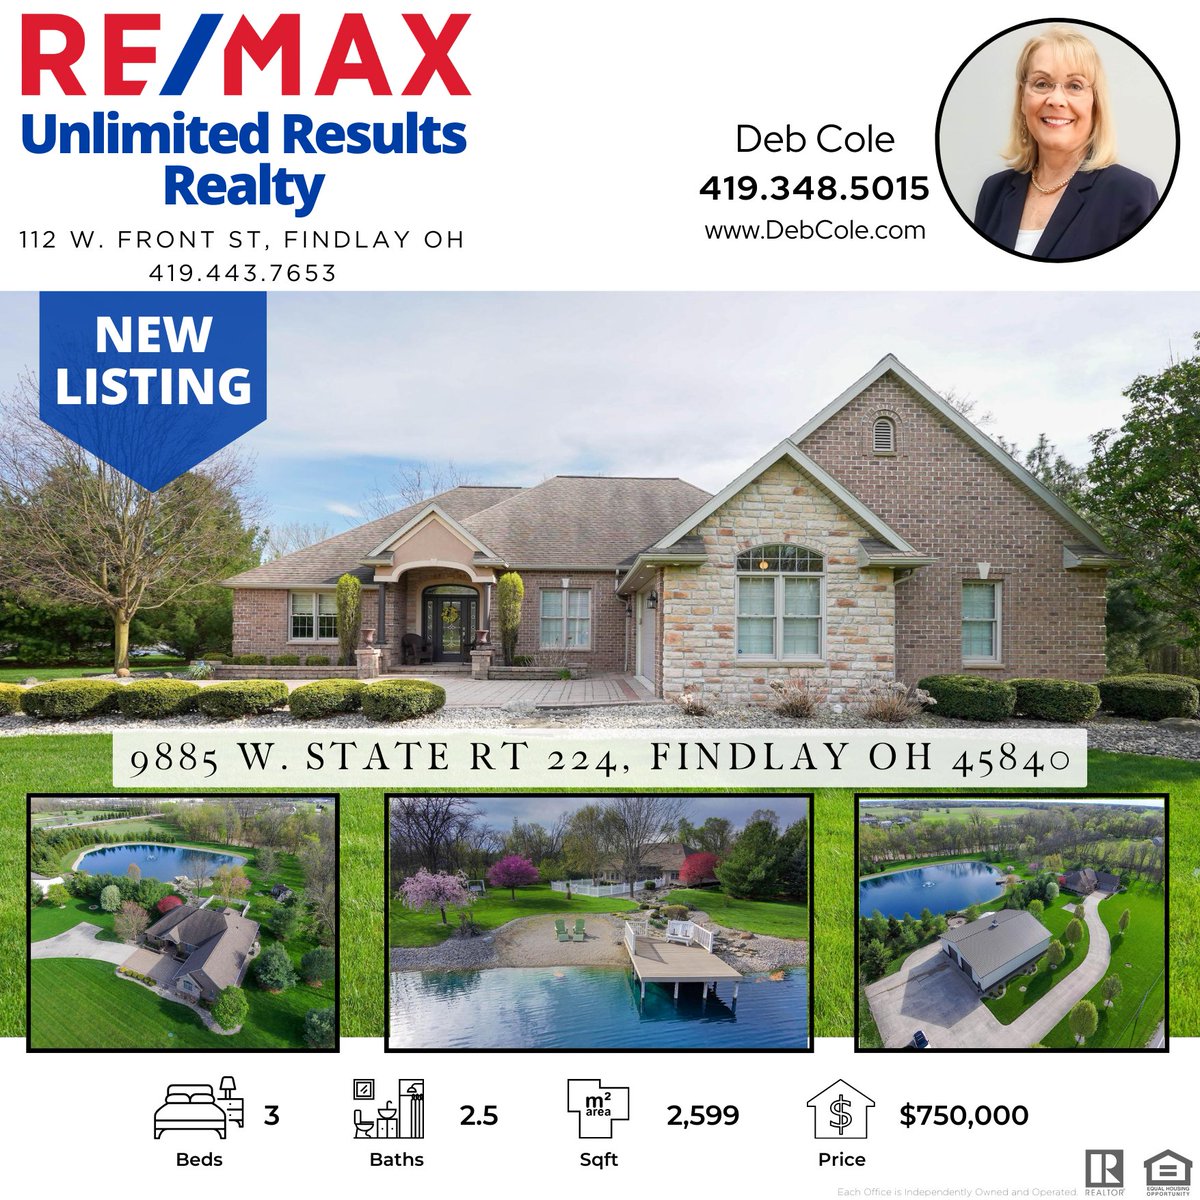 𝗡𝗘𝗪 𝗟𝗜𝗦𝗧𝗜𝗡𝗚! 
9885 W. St. Rt 224, Findlay OH
3 BR | 2.5 BA | 2,599 sqft | 11.345 ac

𝗗𝗲𝗯 𝗖𝗼𝗹𝗲 | 𝟰𝟭𝟵.𝟯𝟰𝟴.𝟱𝟬𝟭𝟱
For more info, visit: DebCole.com or give Deb a call!
#realestate #remax #remaxagent #cmn #northwestohio #ohiorealestate #newlisting